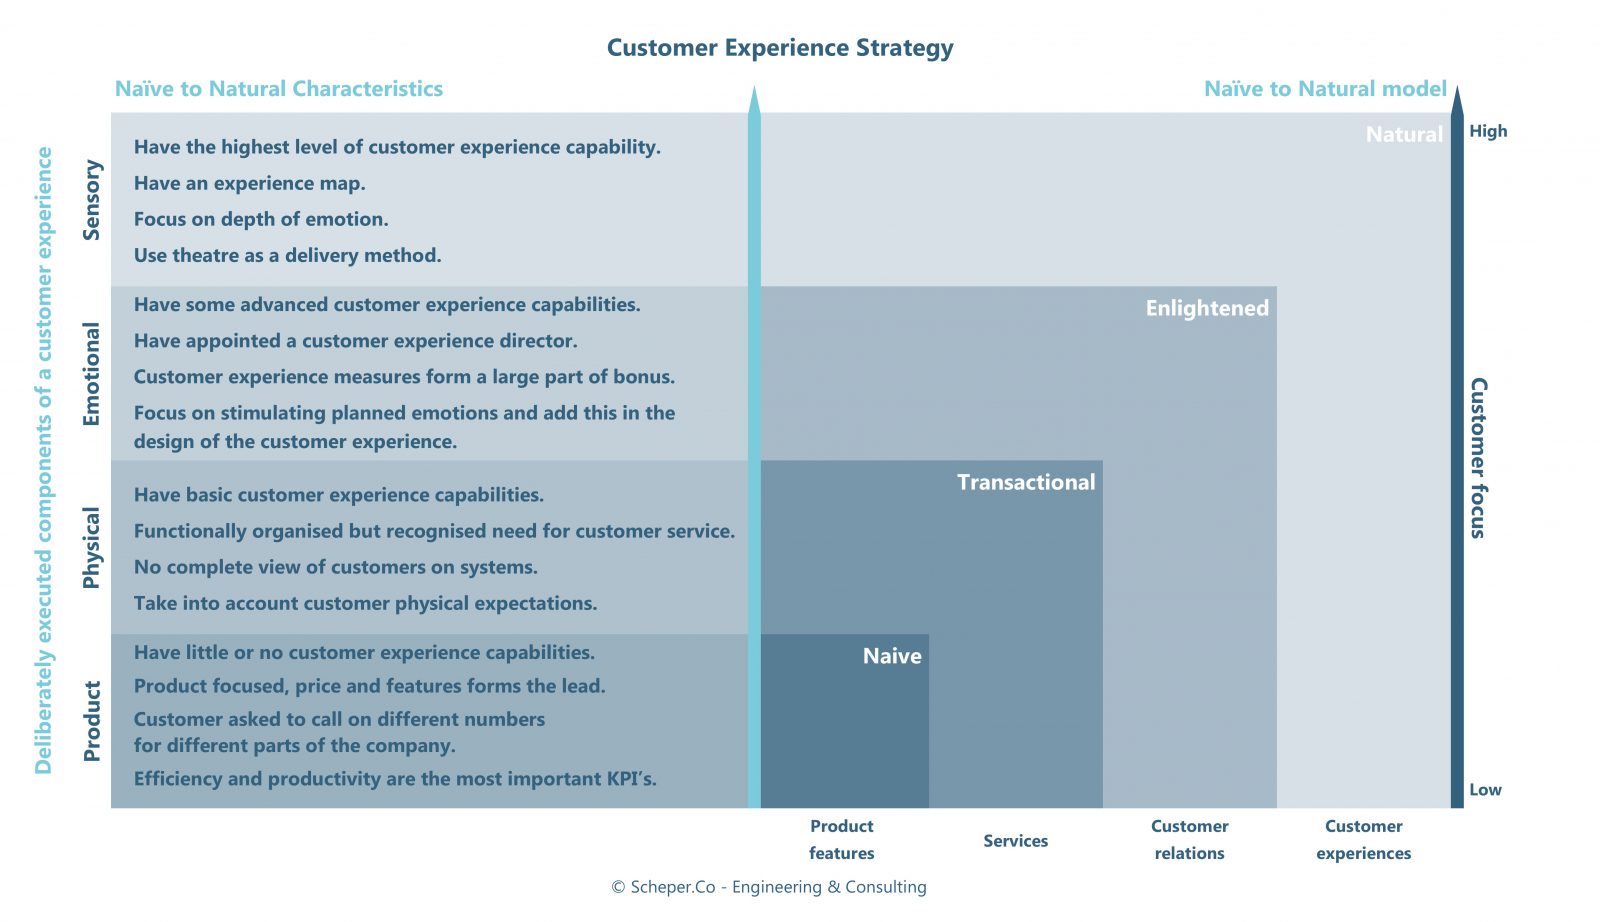 Customer Experience Strategy